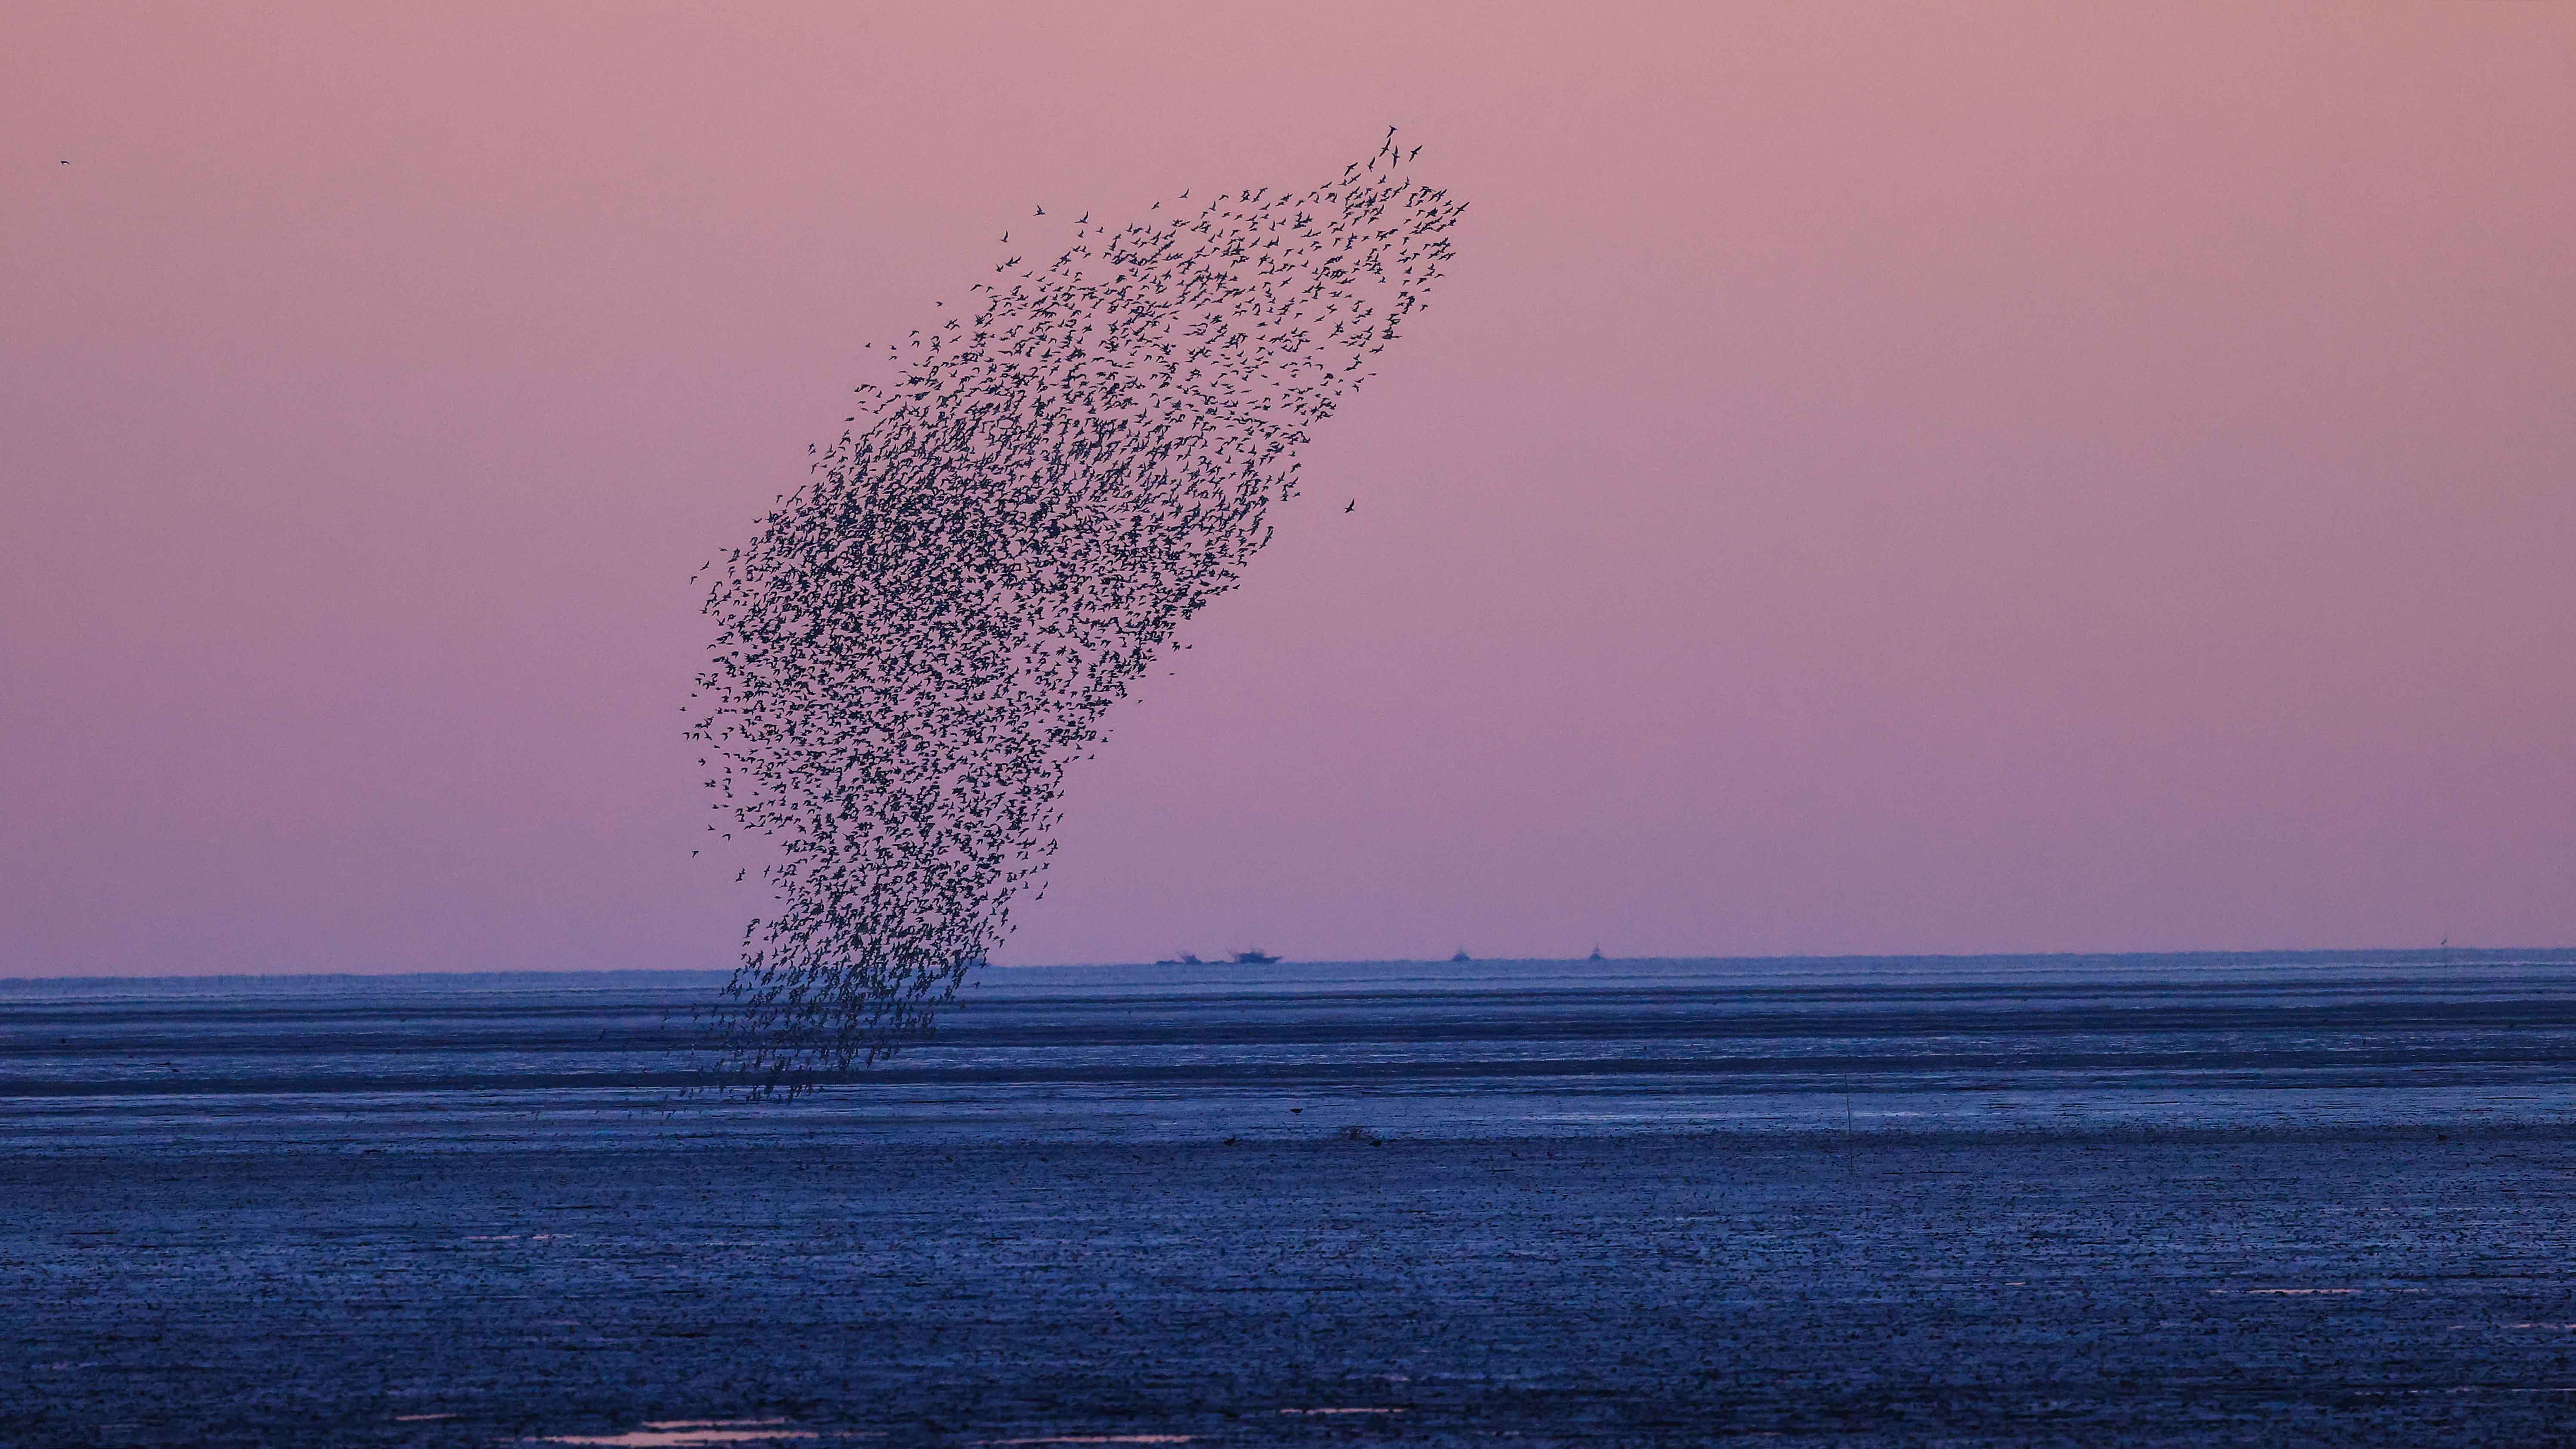 'Bird wave':  One of the most wonderful views on Earth